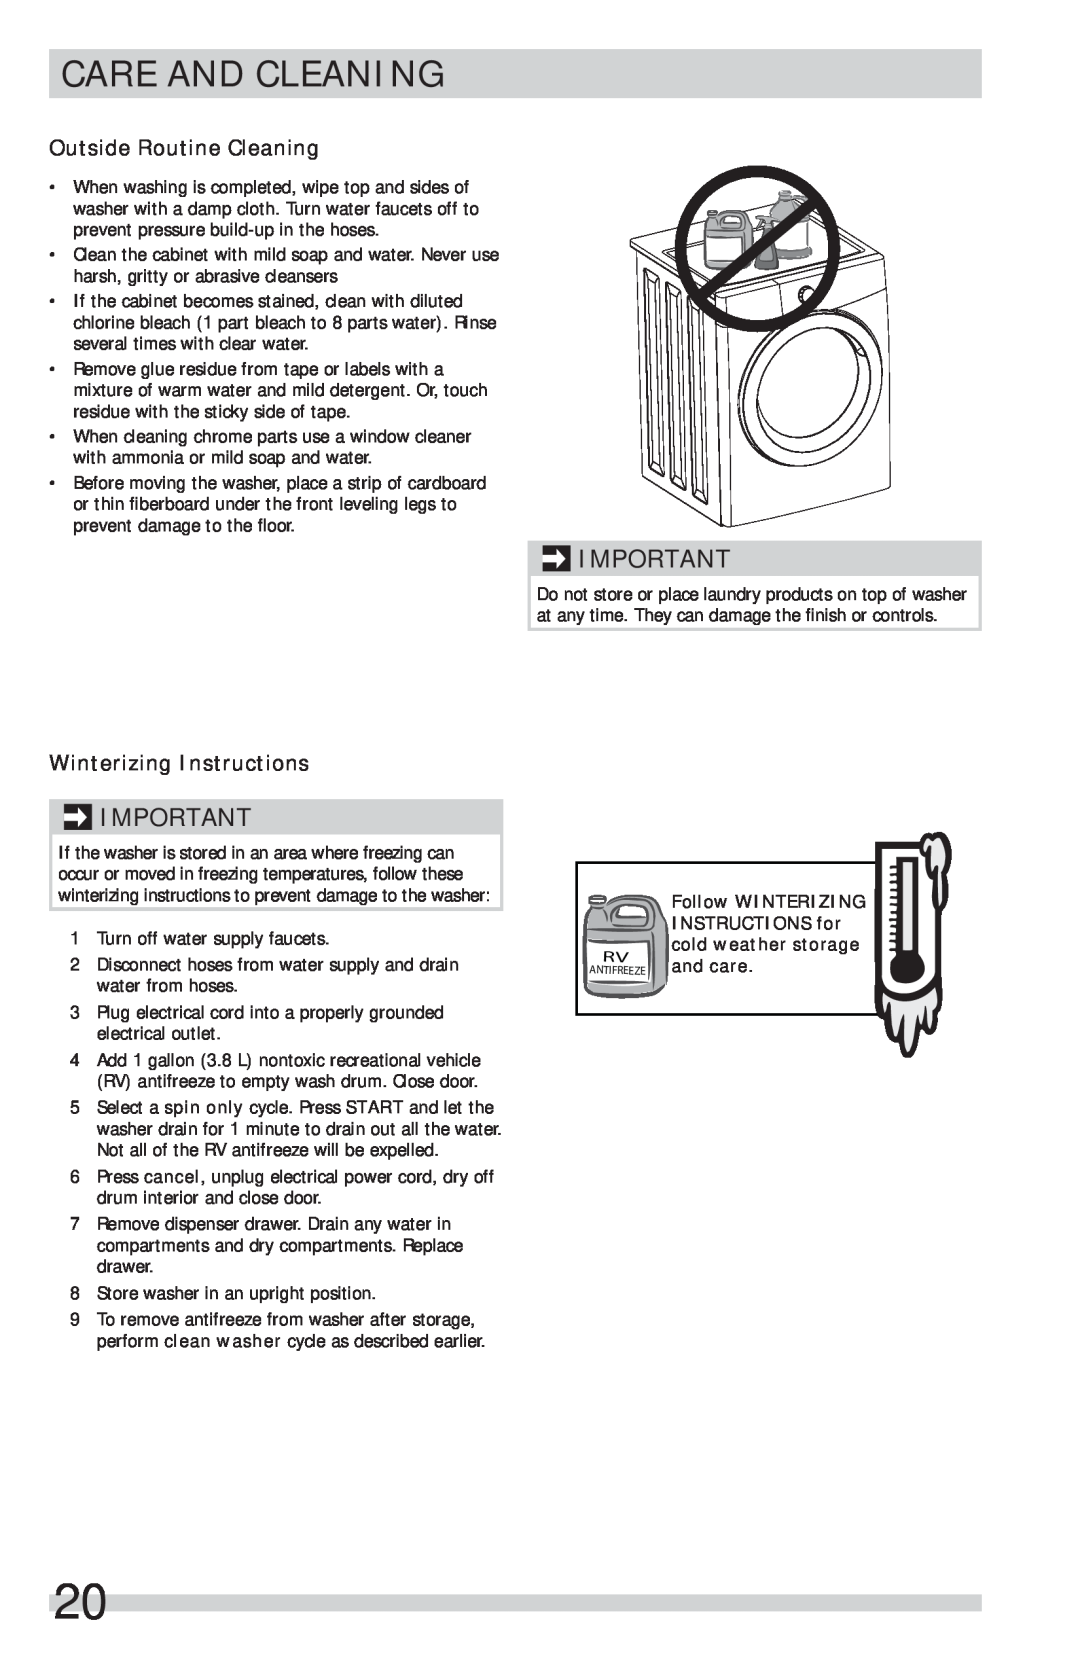 Frigidaire FFFS5115PW Outside Routine Cleaning, Winterizing Instructions, Follow WINTERIZING, INSTRUCTIONS for, and care 